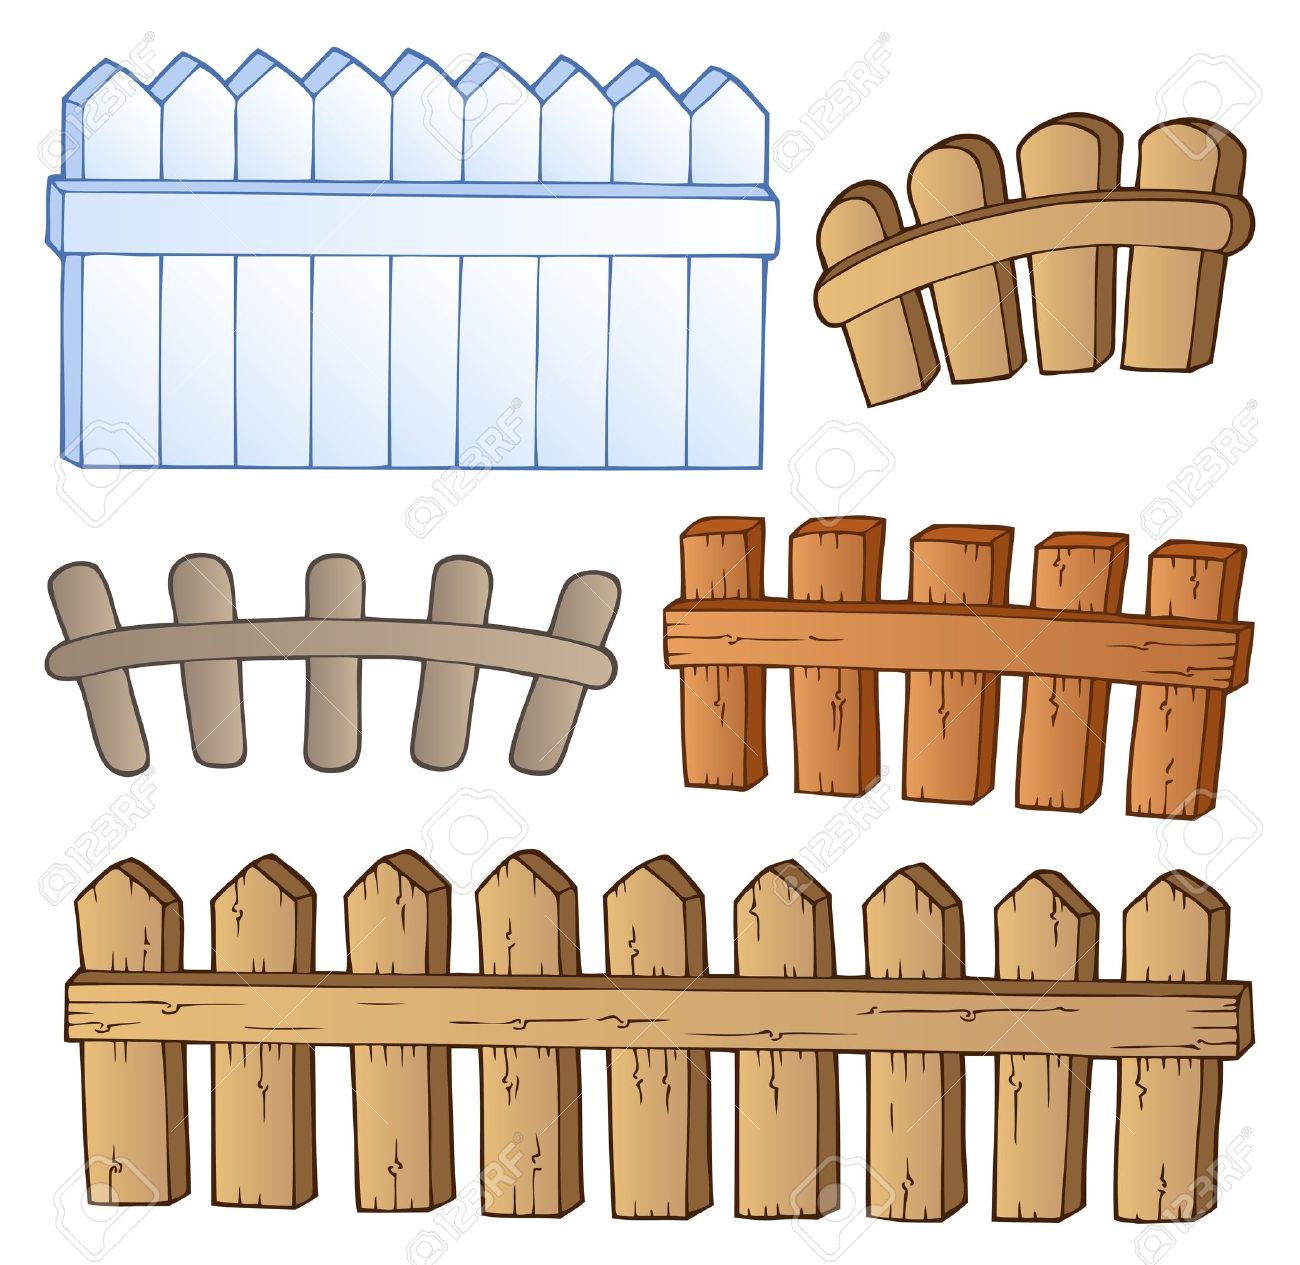 Plank fence clipart - Clipground